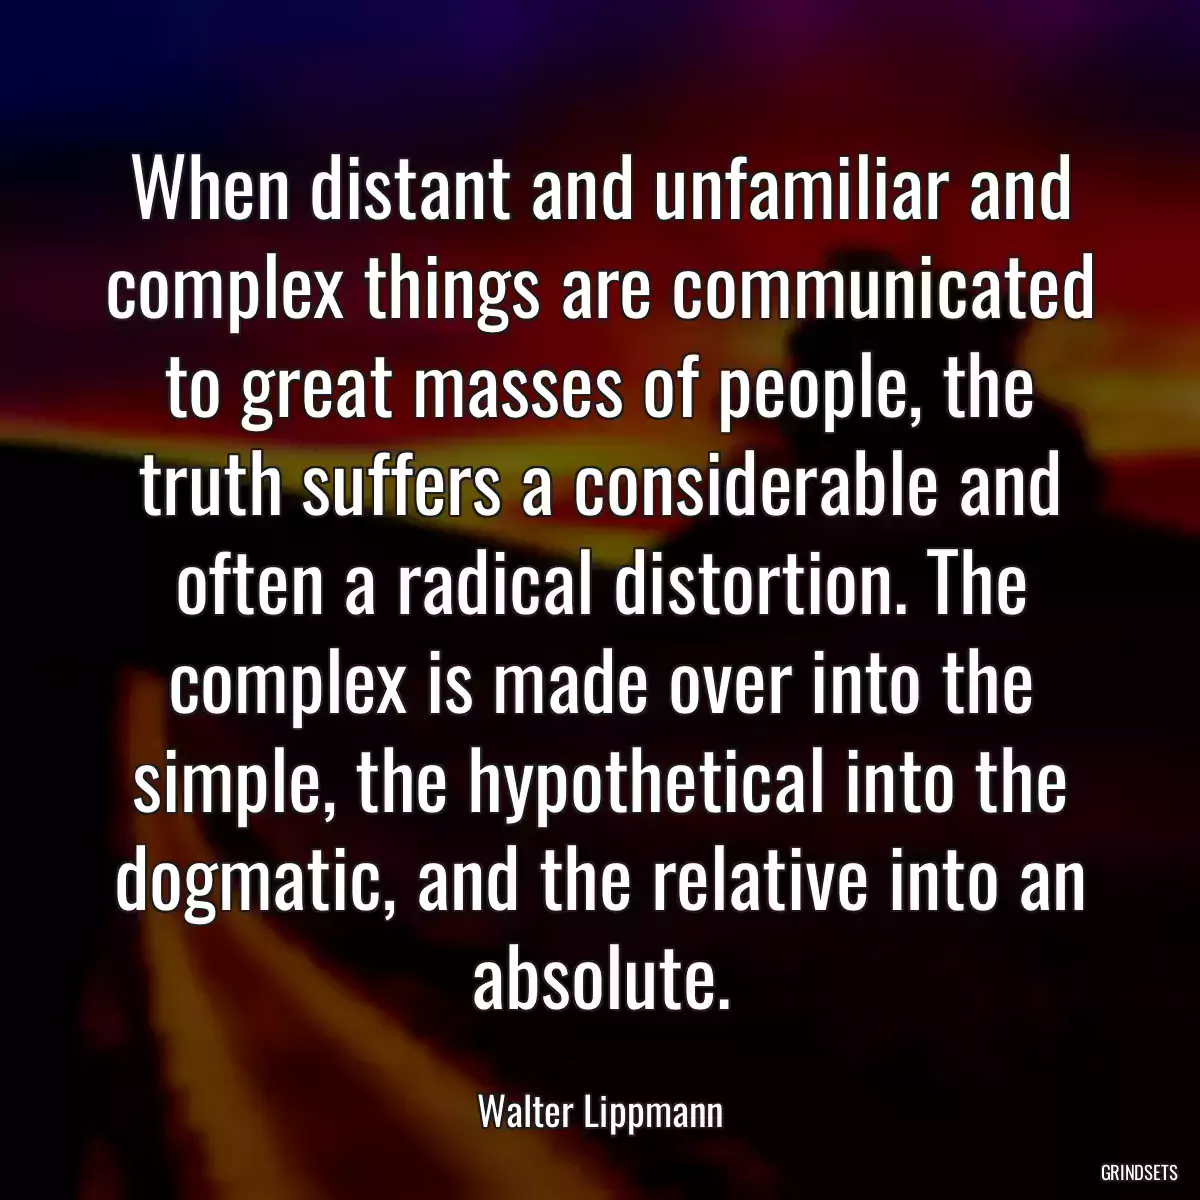 When distant and unfamiliar and complex things are communicated to great masses of people, the truth suffers a considerable and often a radical distortion. The complex is made over into the simple, the hypothetical into the dogmatic, and the relative into an absolute.